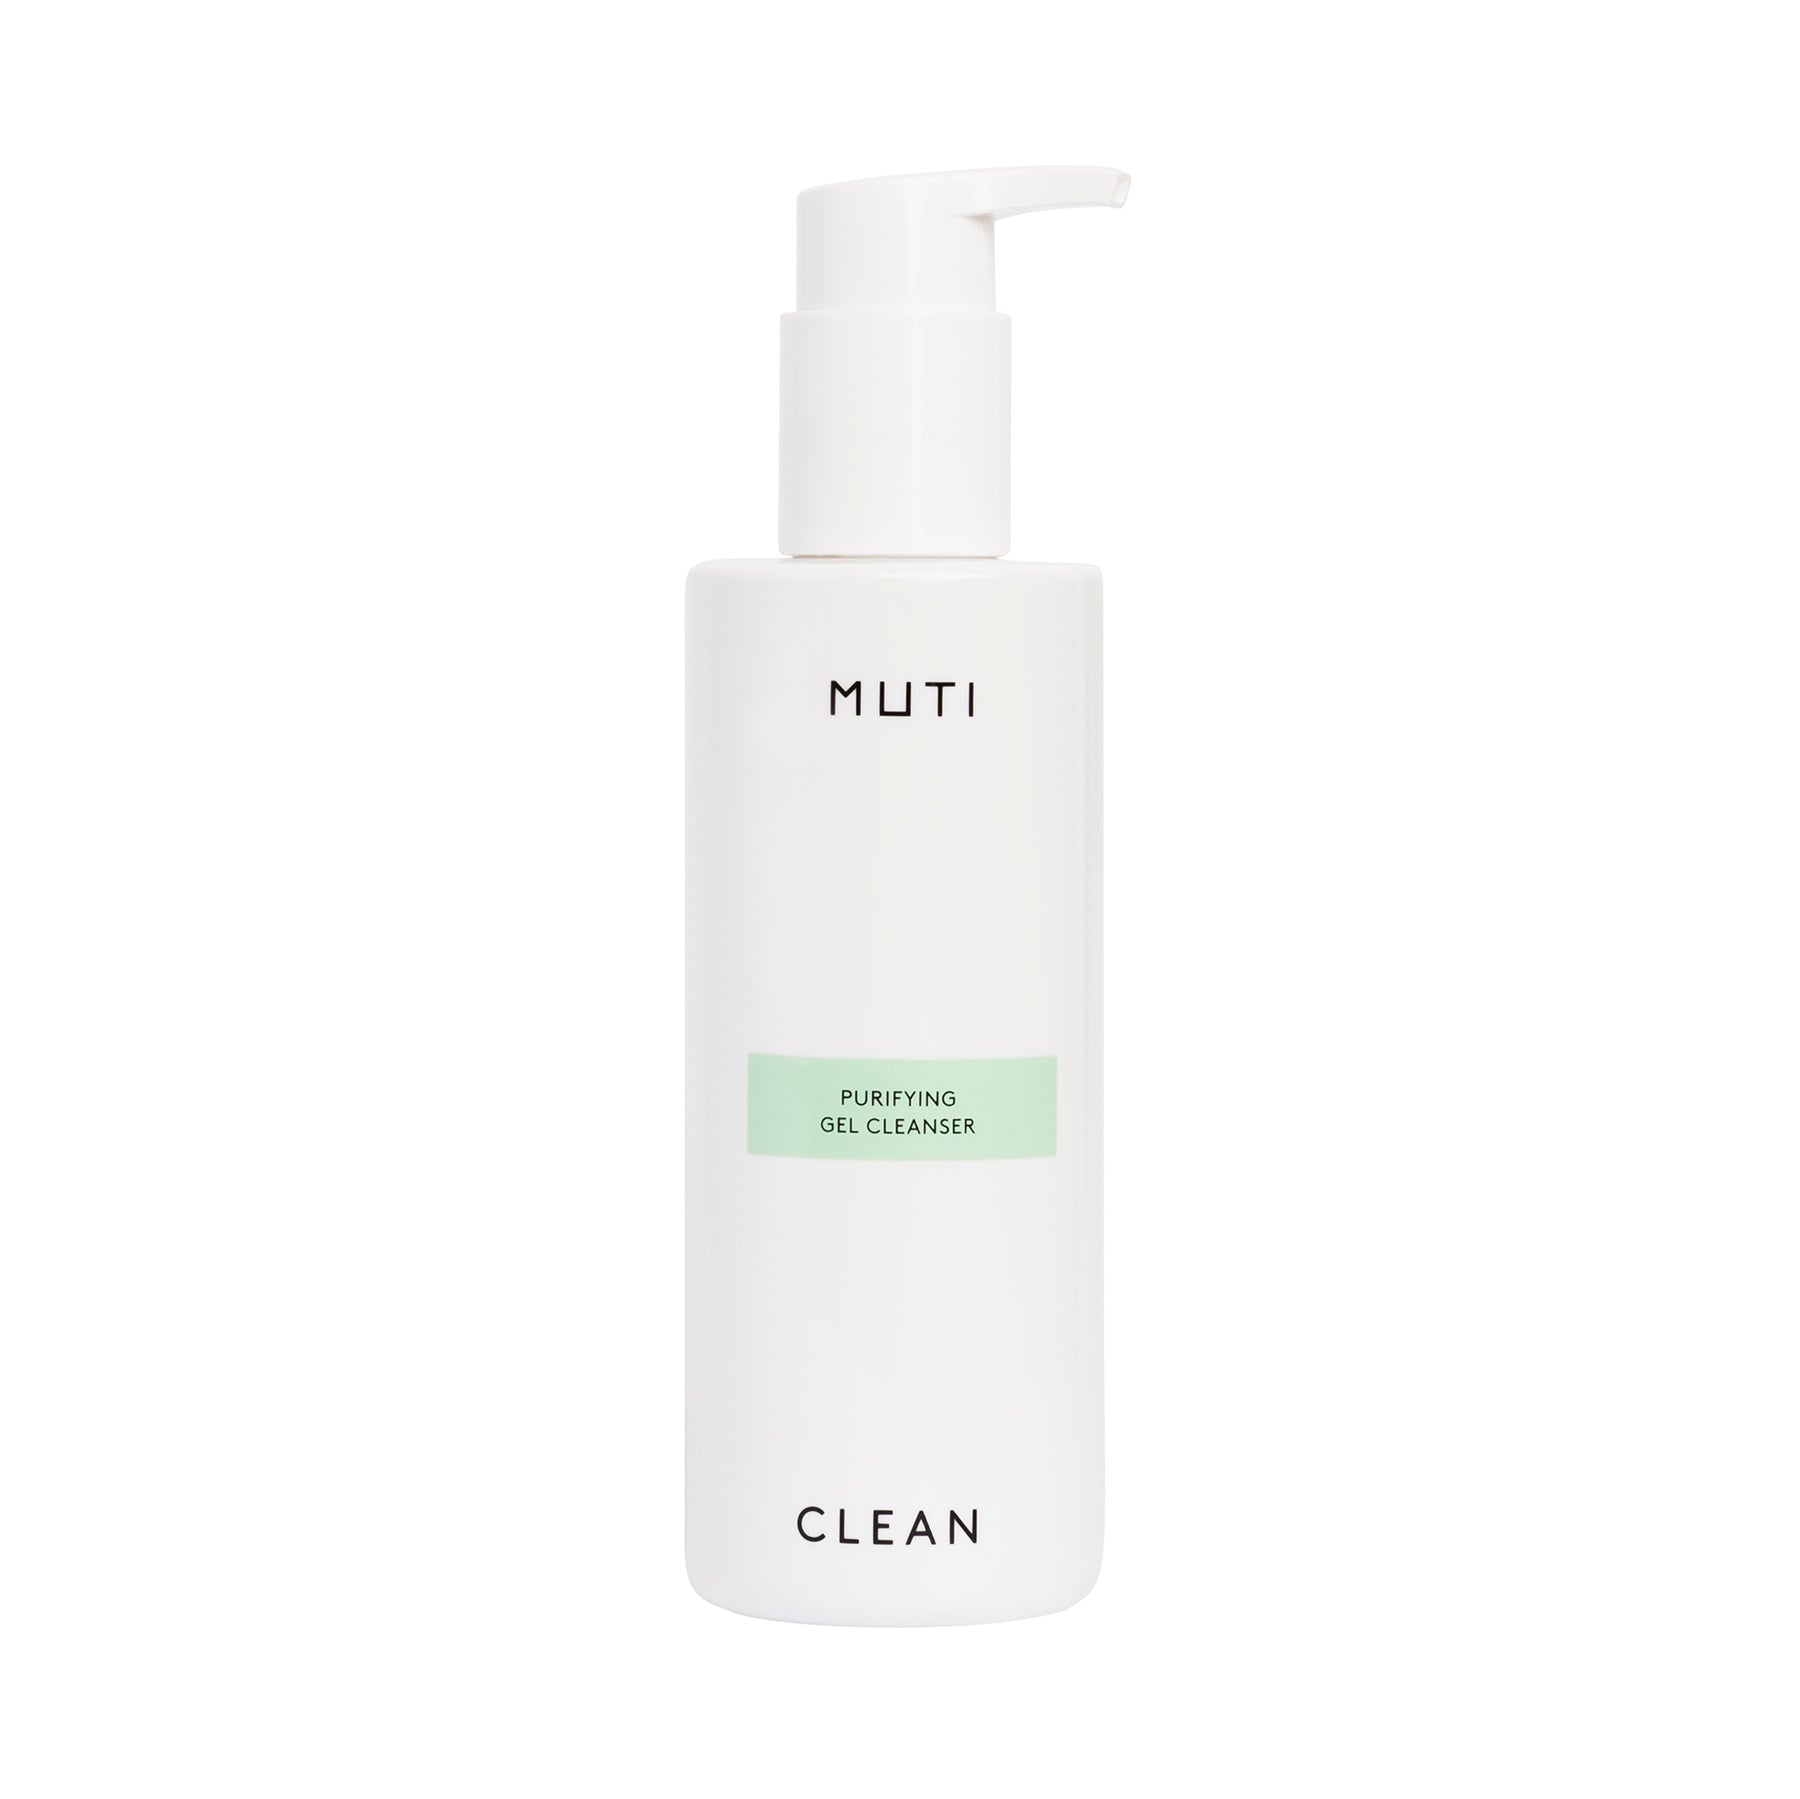 PURIFYING GEL CLEANSER